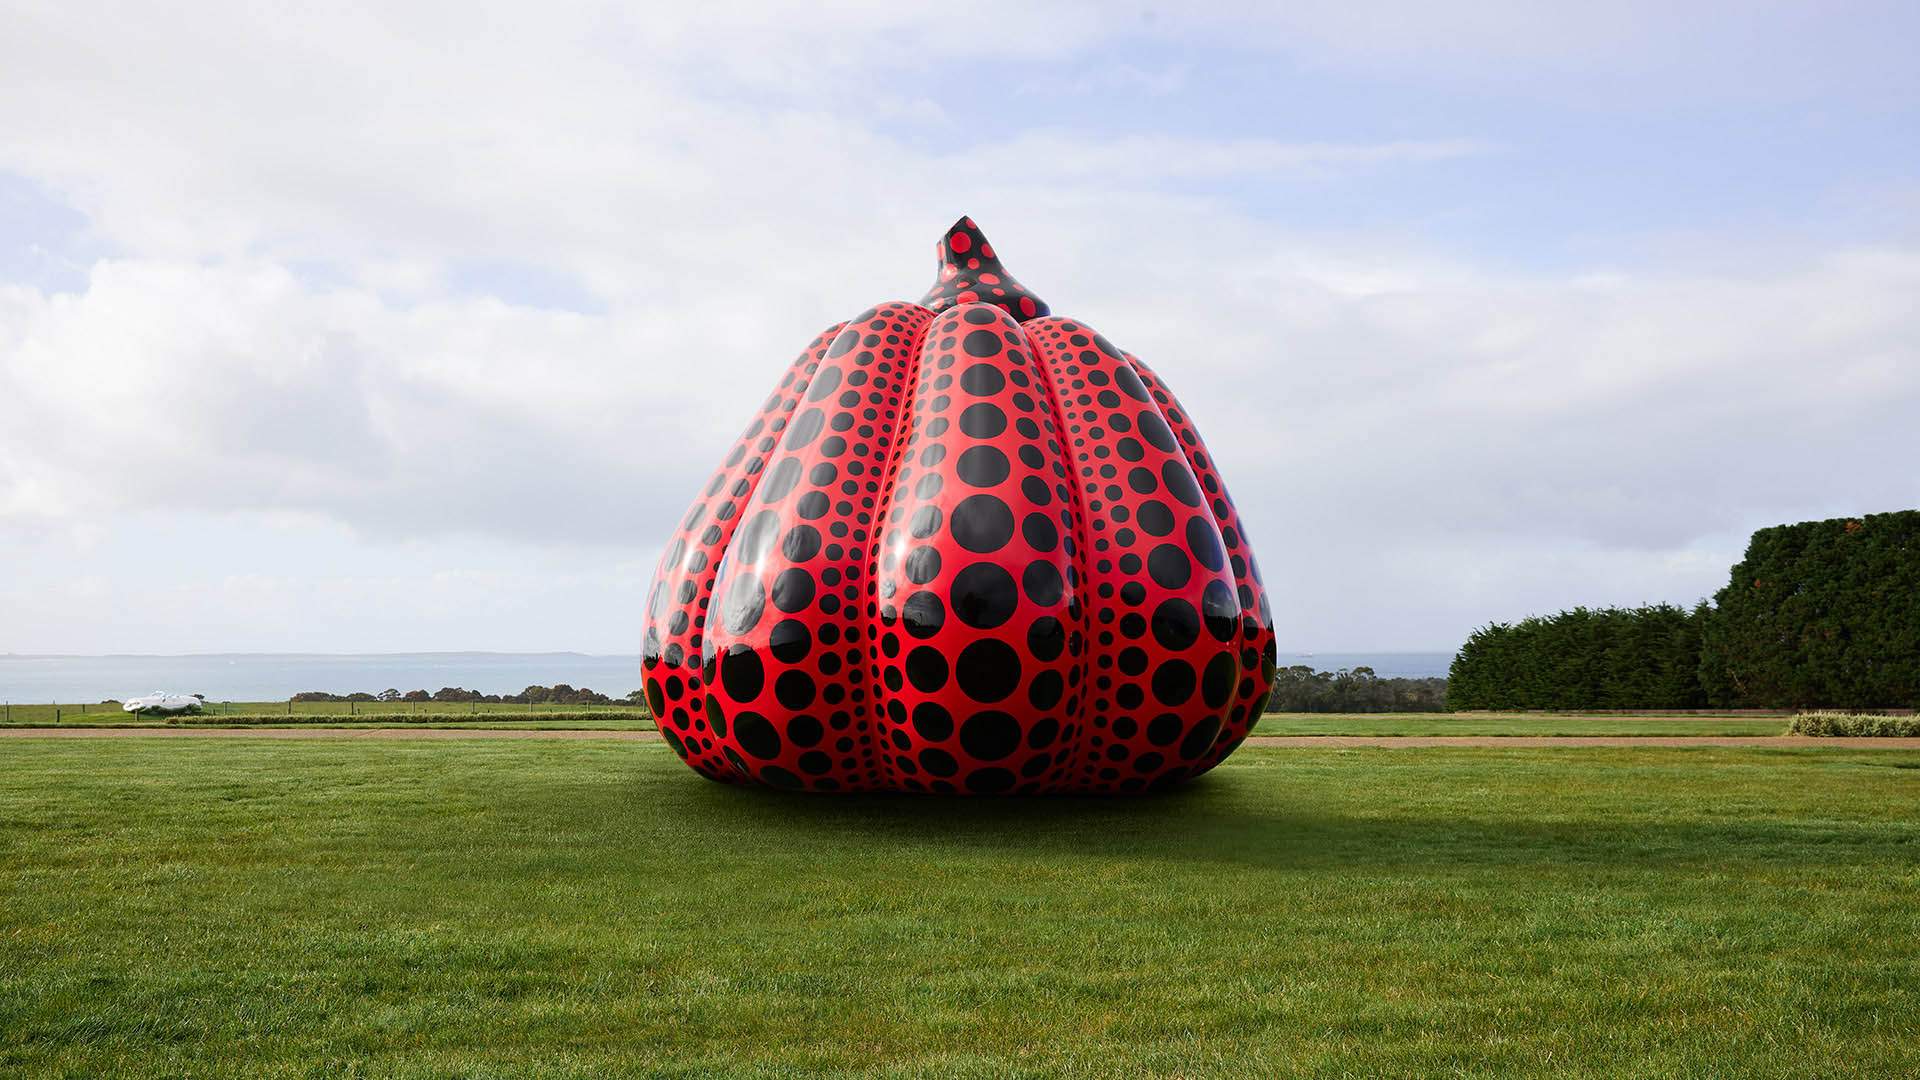 One of Yayoi Kusama's Giant Pumpkins Is Taking Up Permanent Residence in an Australian Sculpture Park